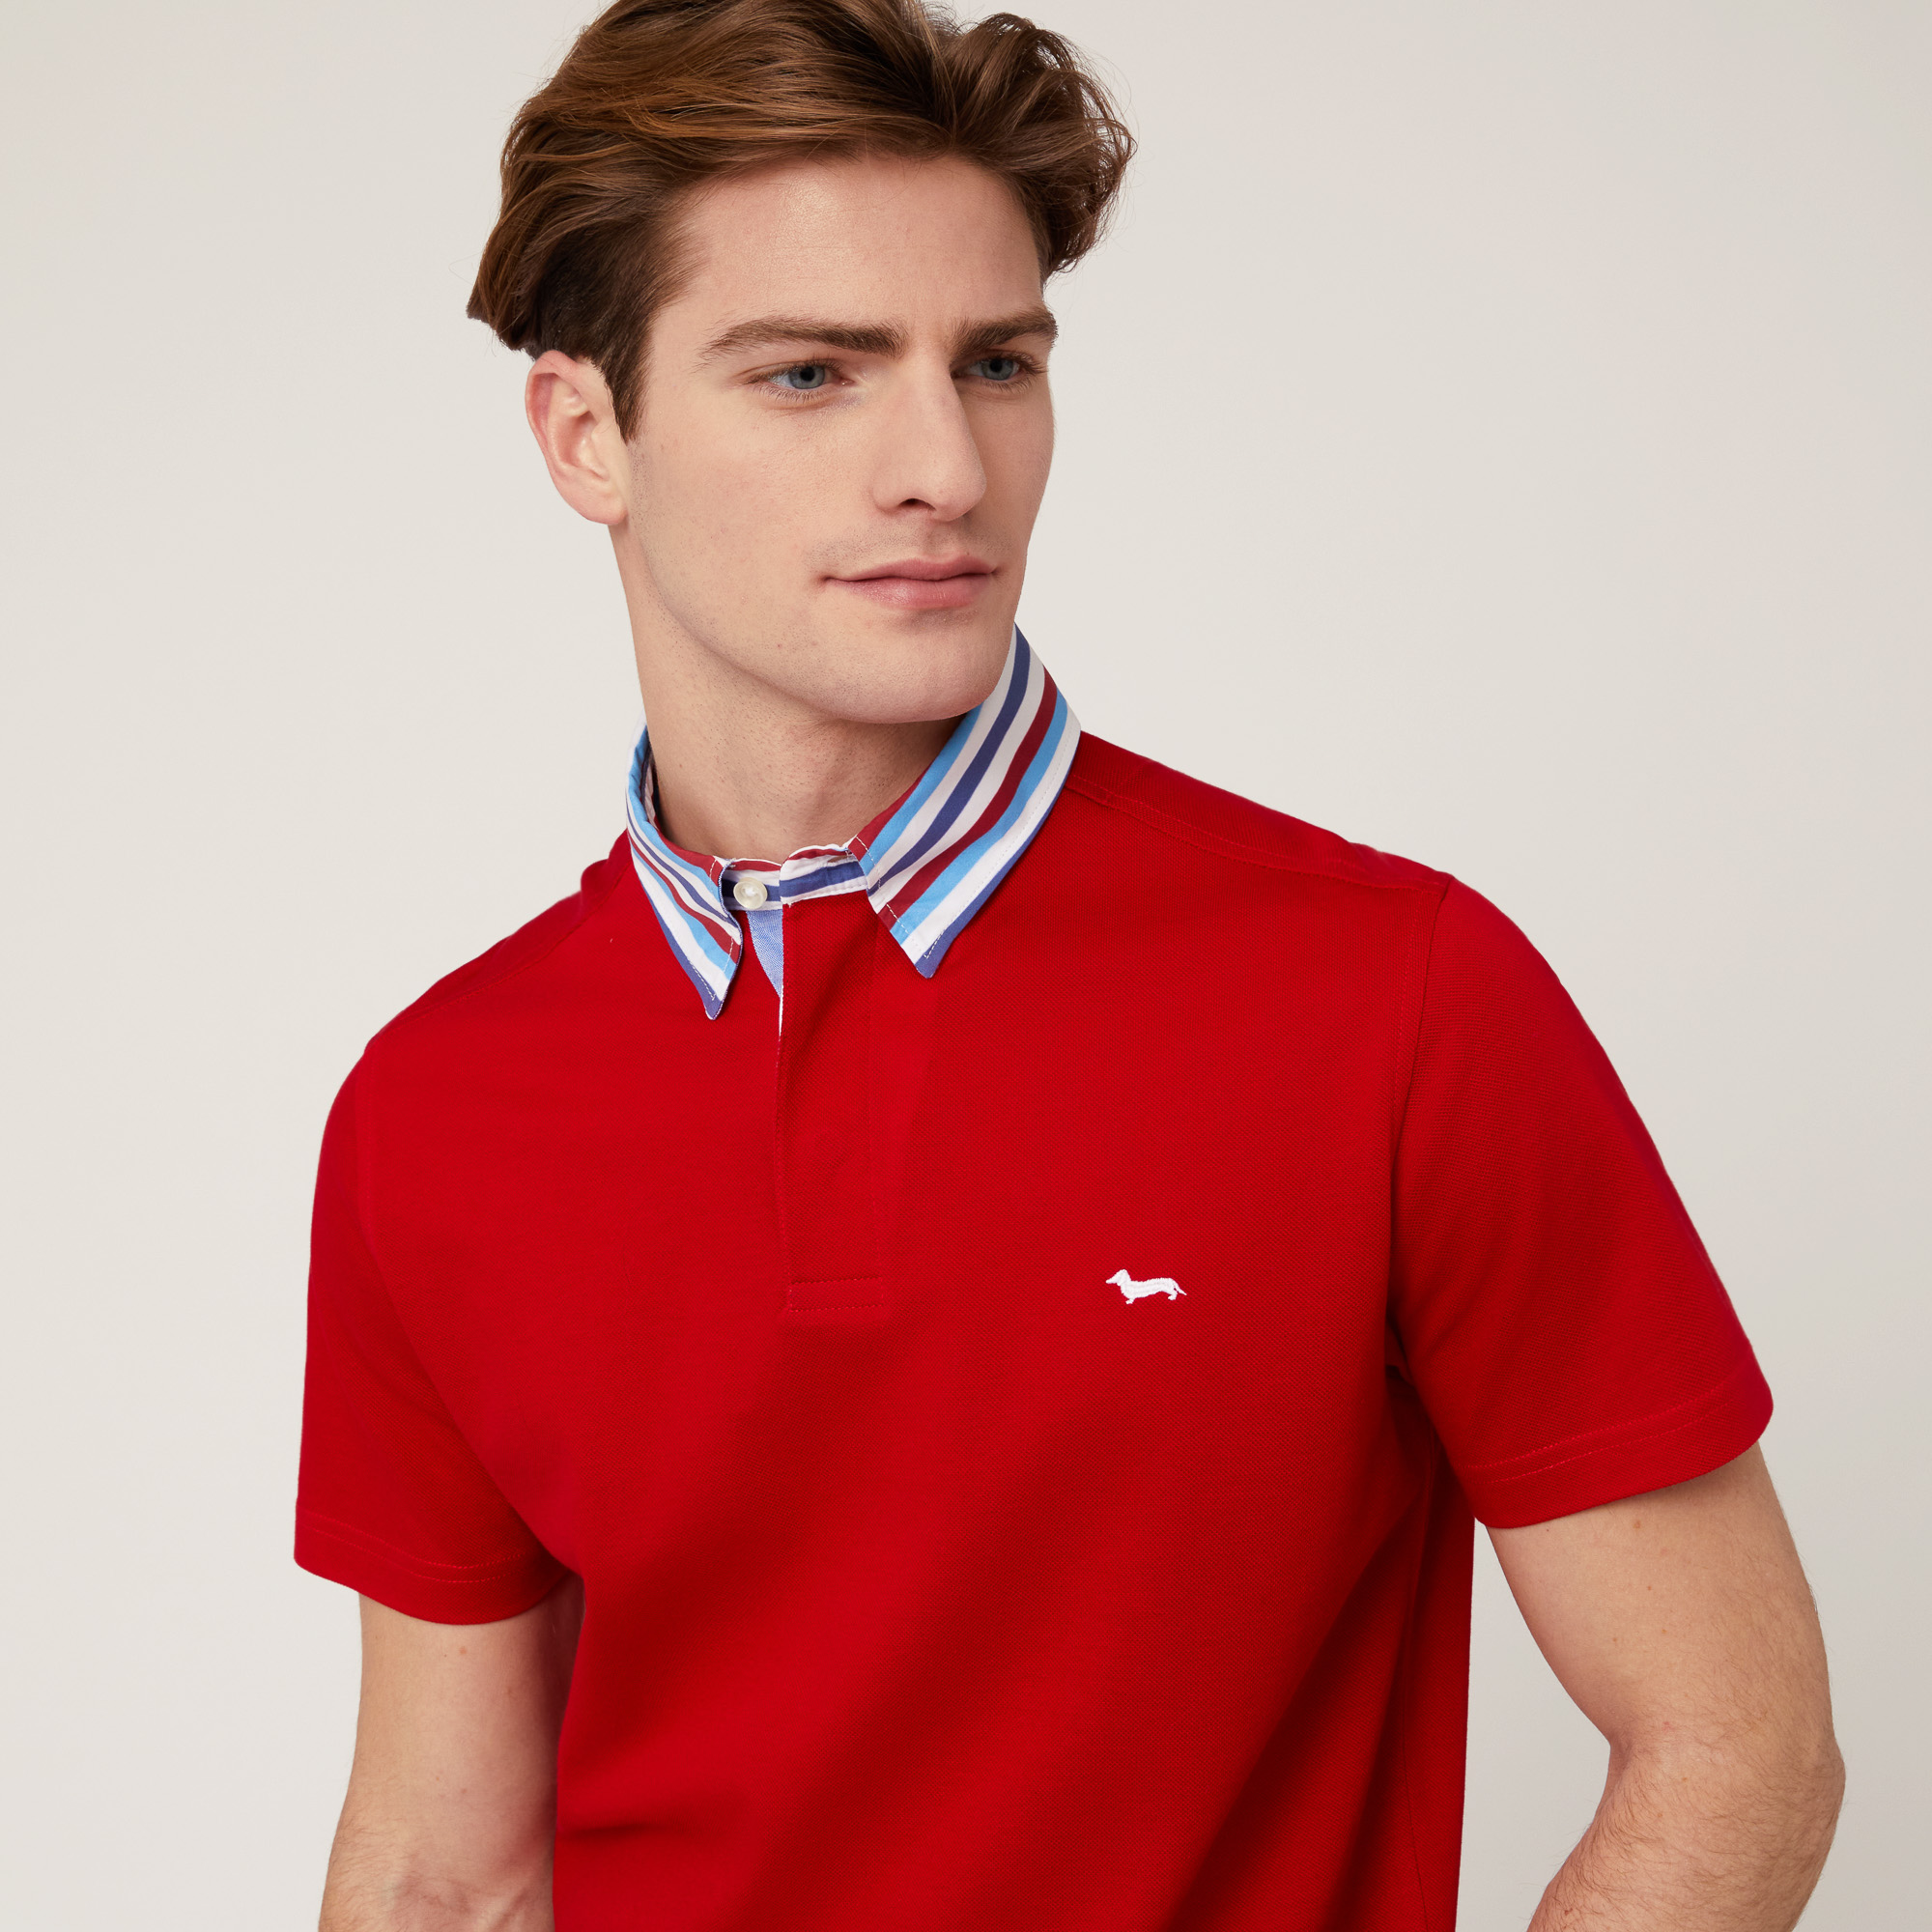 Vietri Polo Shirt with Multicolor Collar, Red, large image number 2